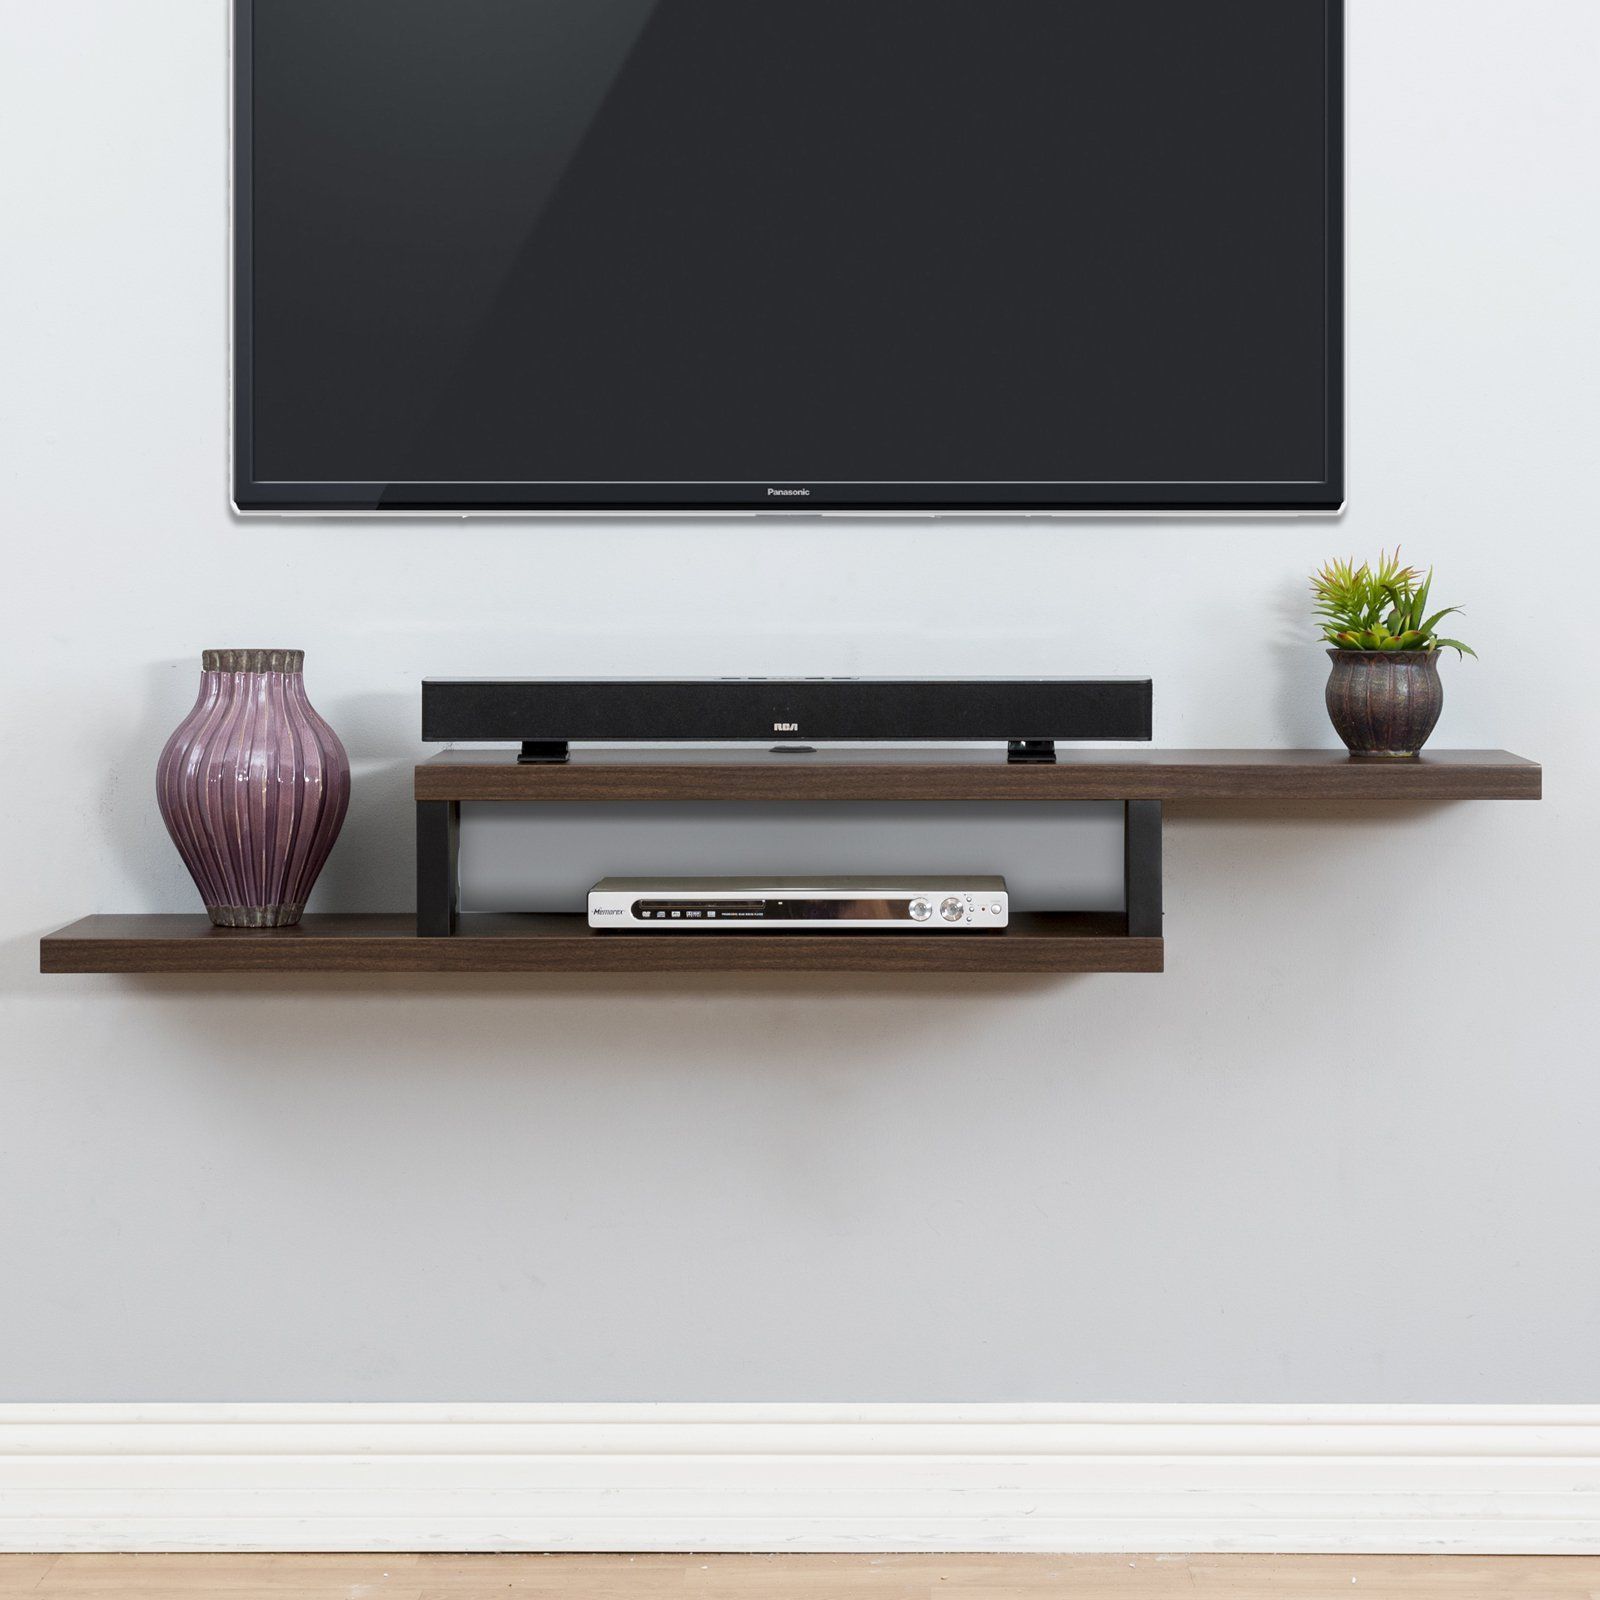 Martin Furniture Ascend Wall Mounted Tv Shelf | From In Wall Mounted Tv Racks (View 11 of 15)